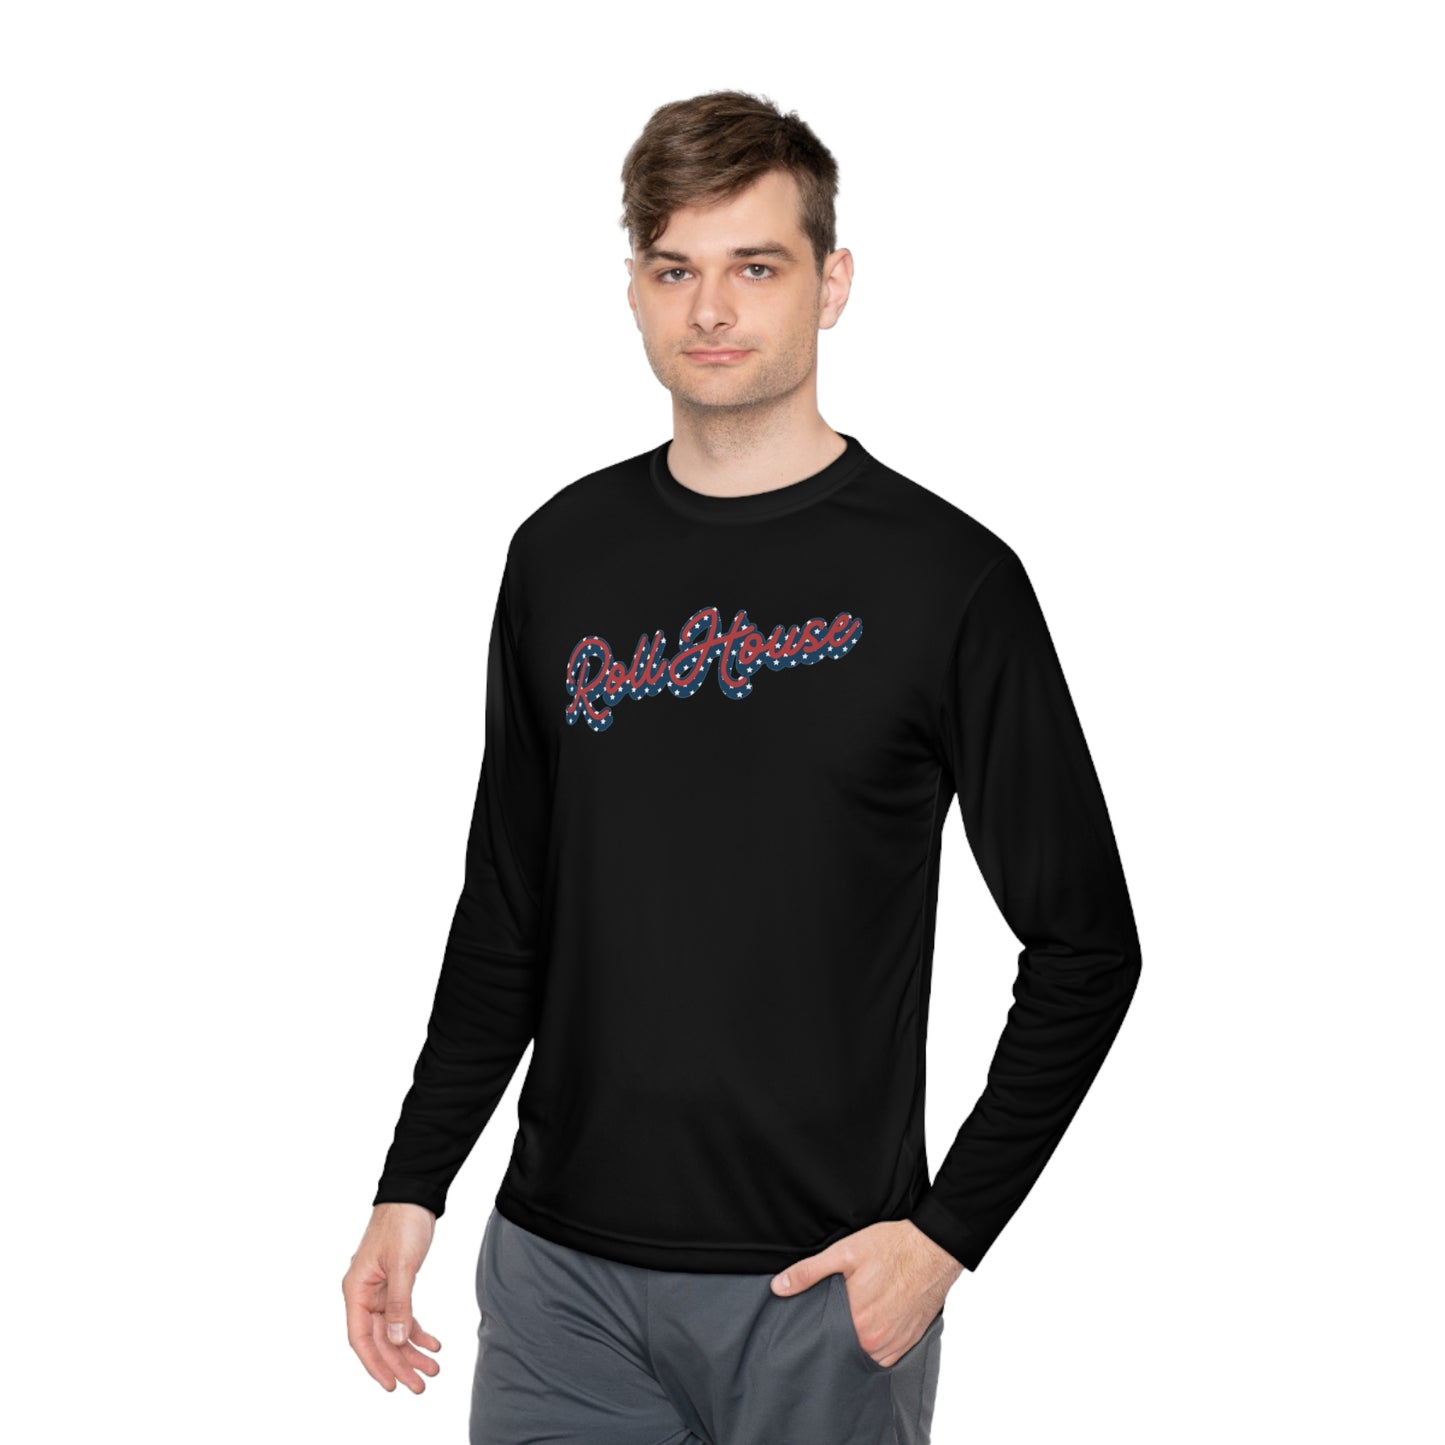 RollHouse ATHLETIC MATERIAL Lightweight Long Sleeve Tee